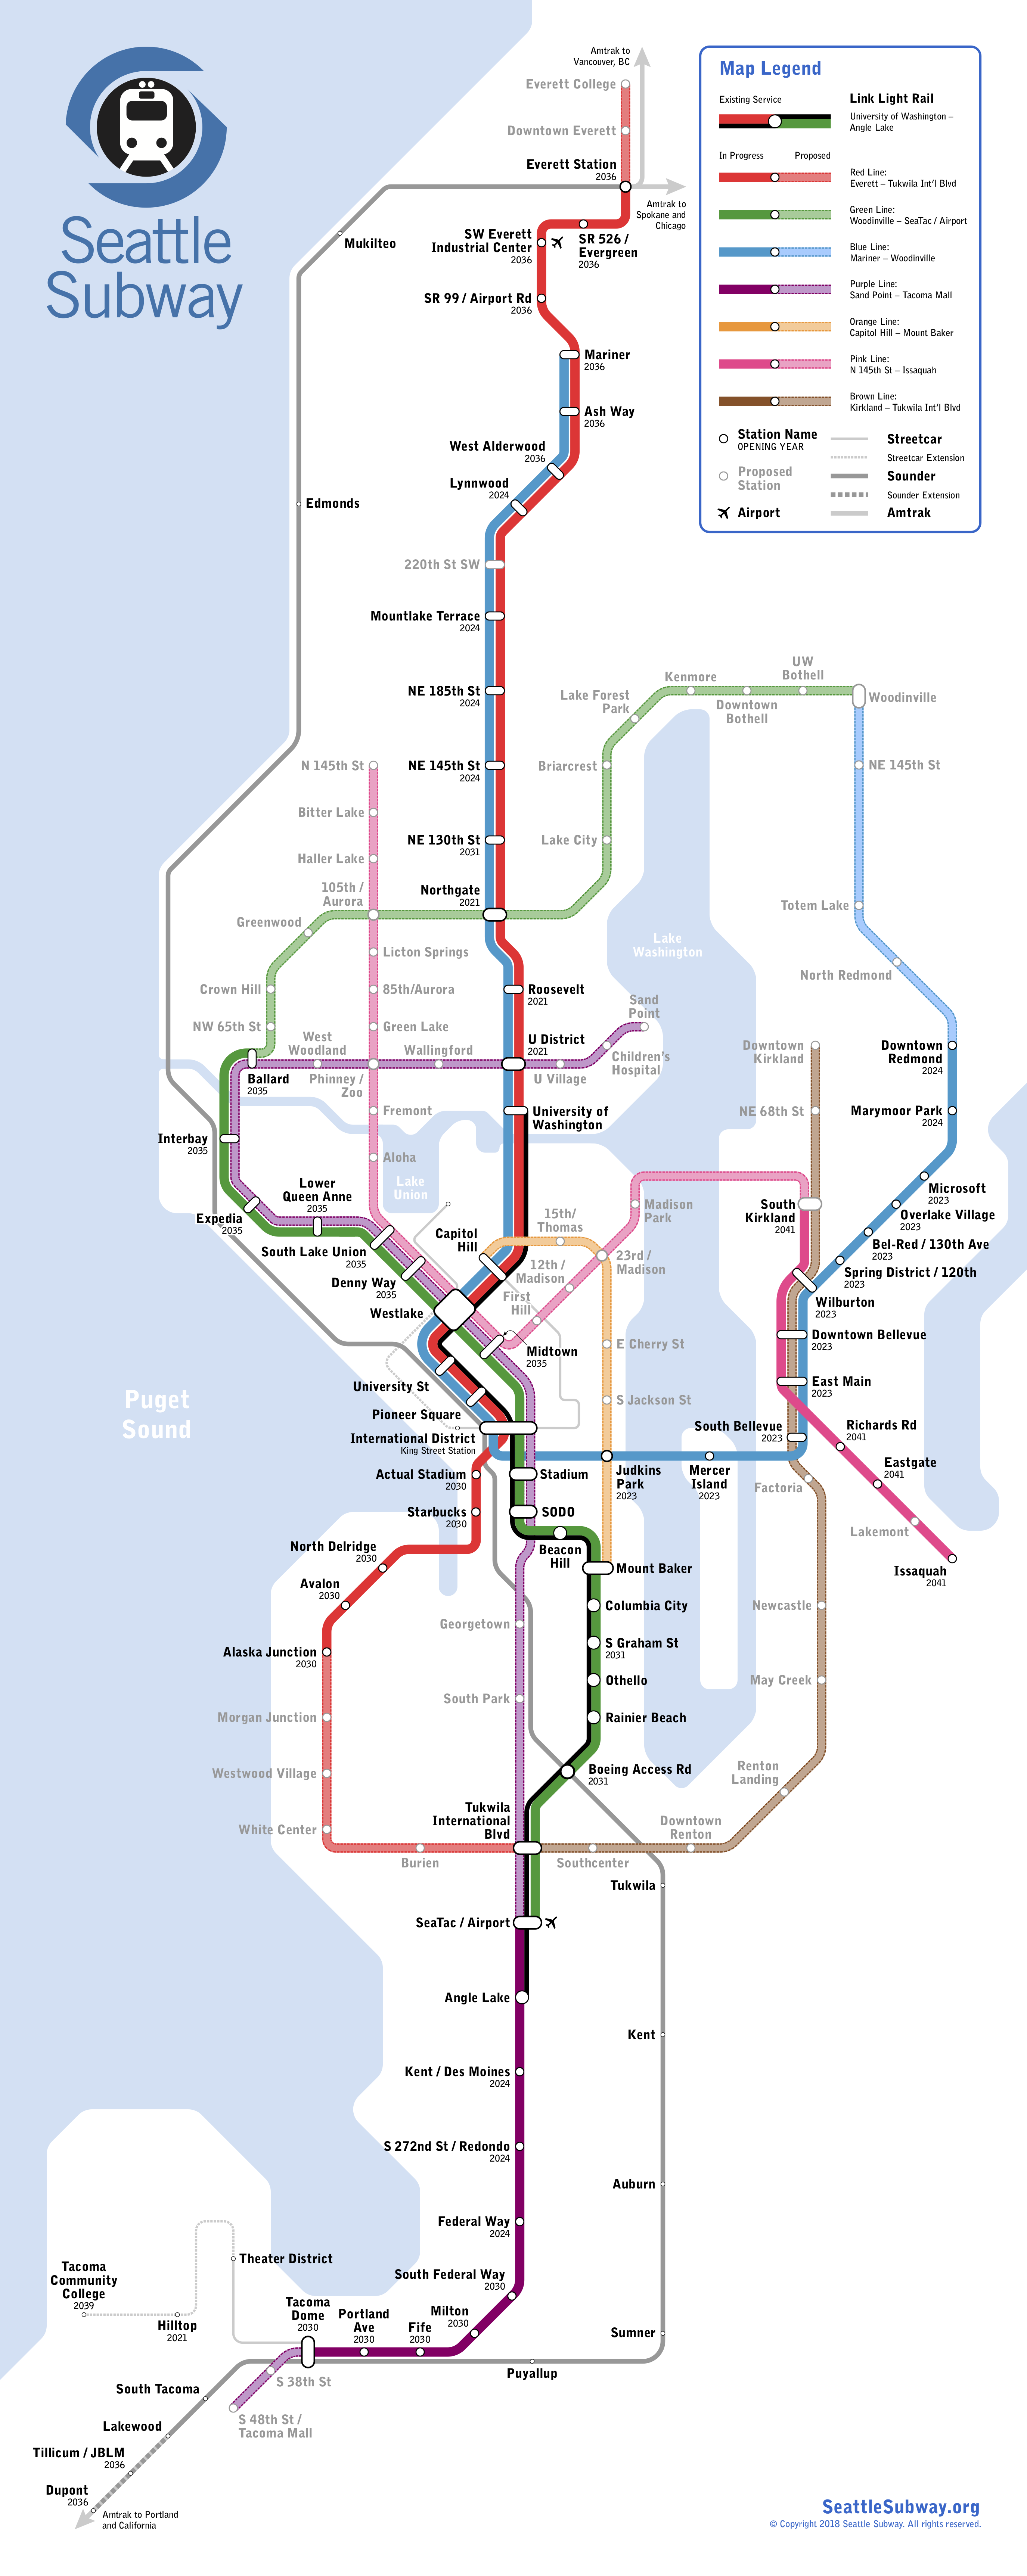 2018 Seattle Subway vision map. Click for larger version. (Seattle Subway)